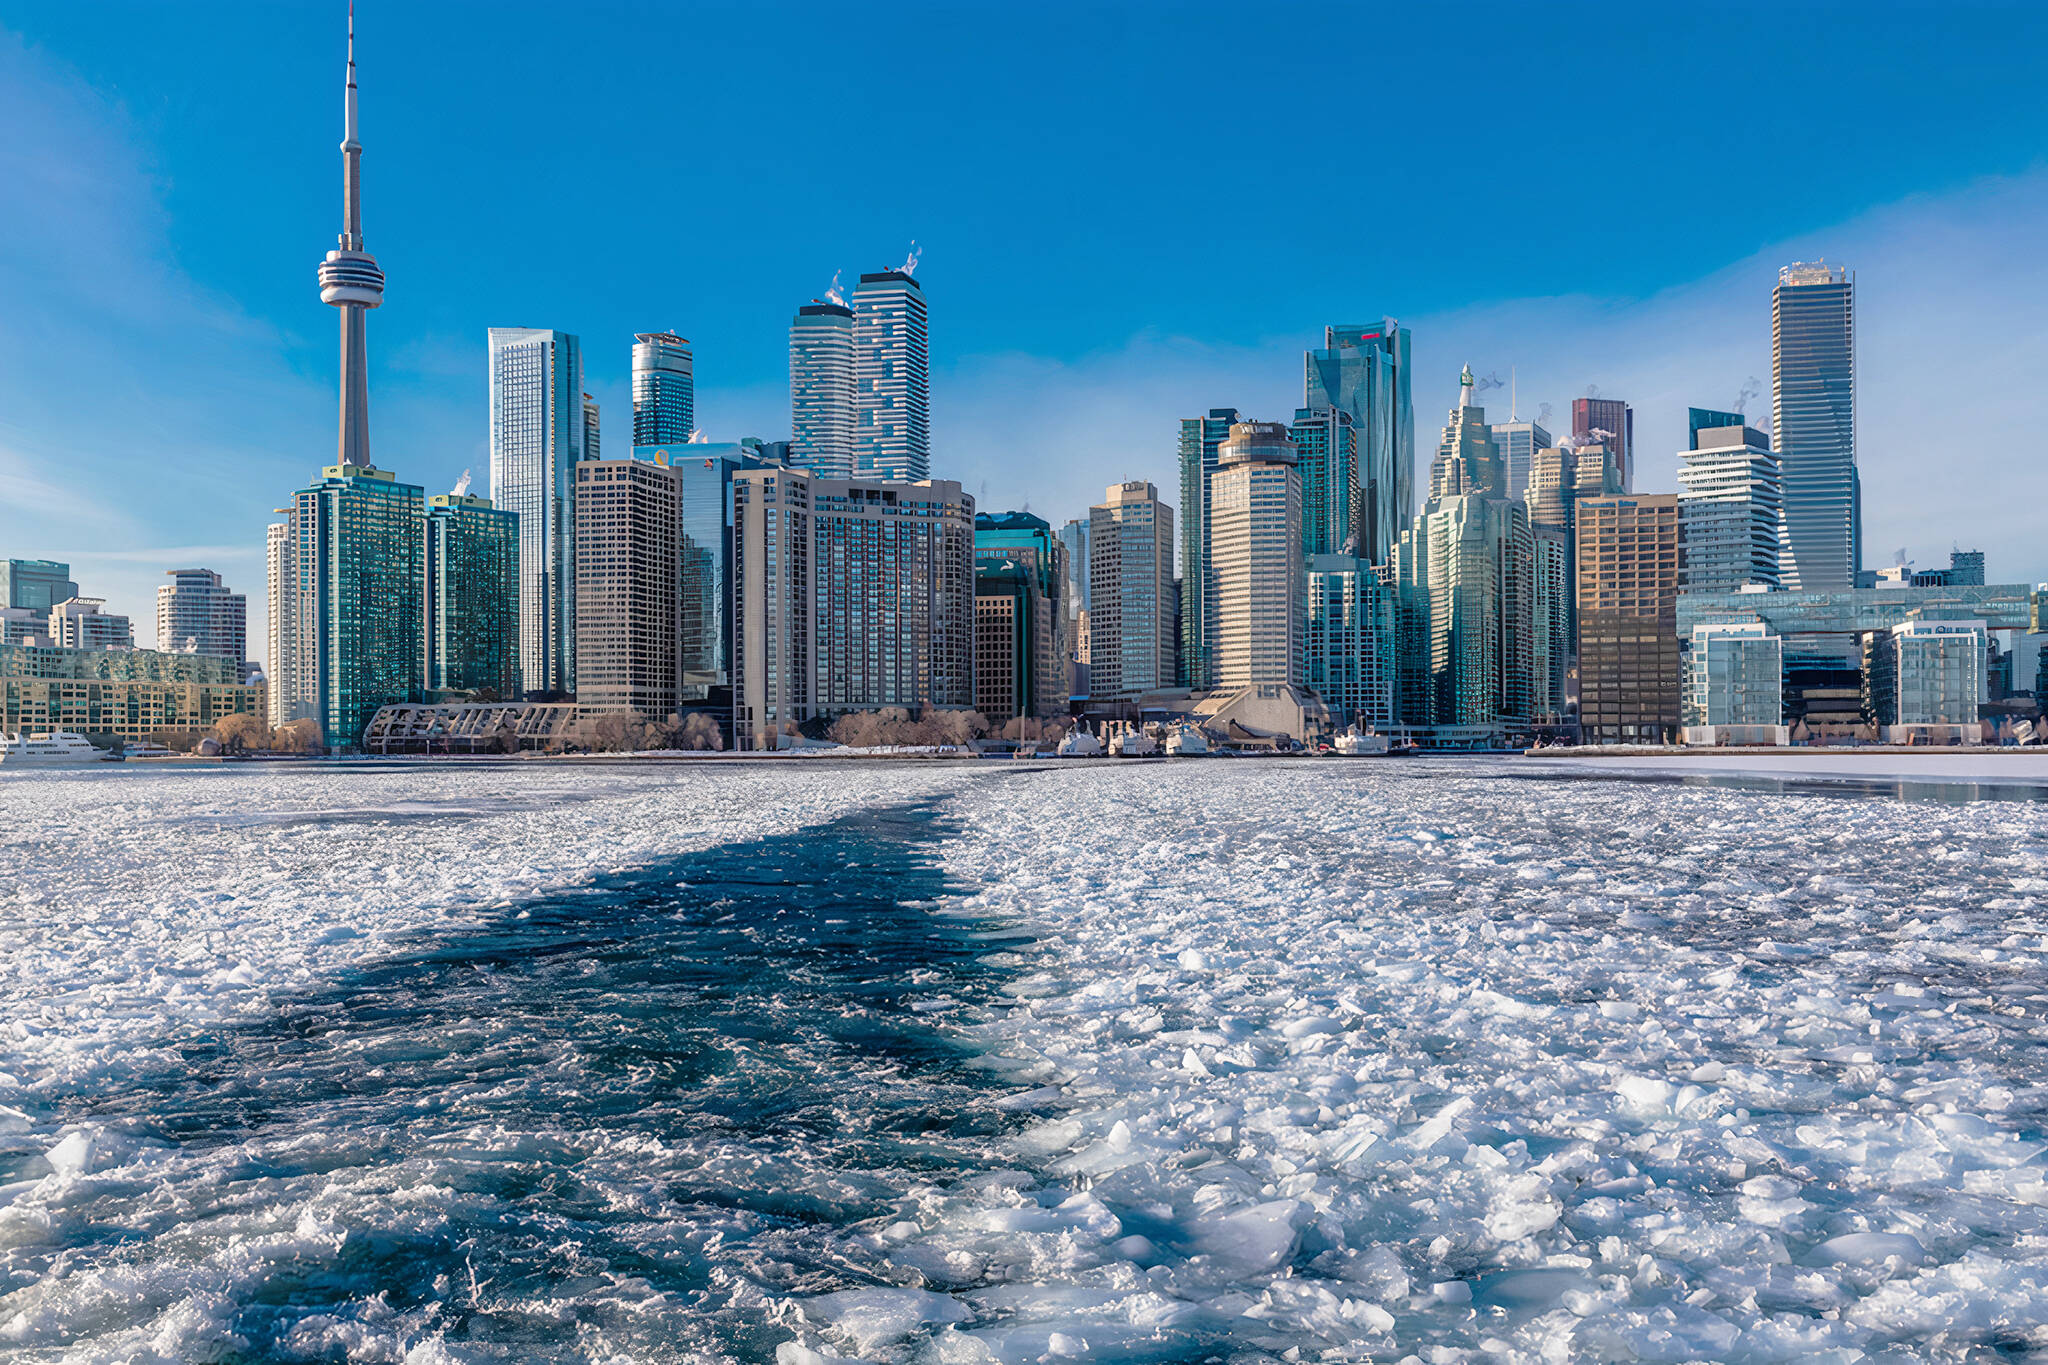 Toronto faces extreme cold weather alert with more snow and bitter